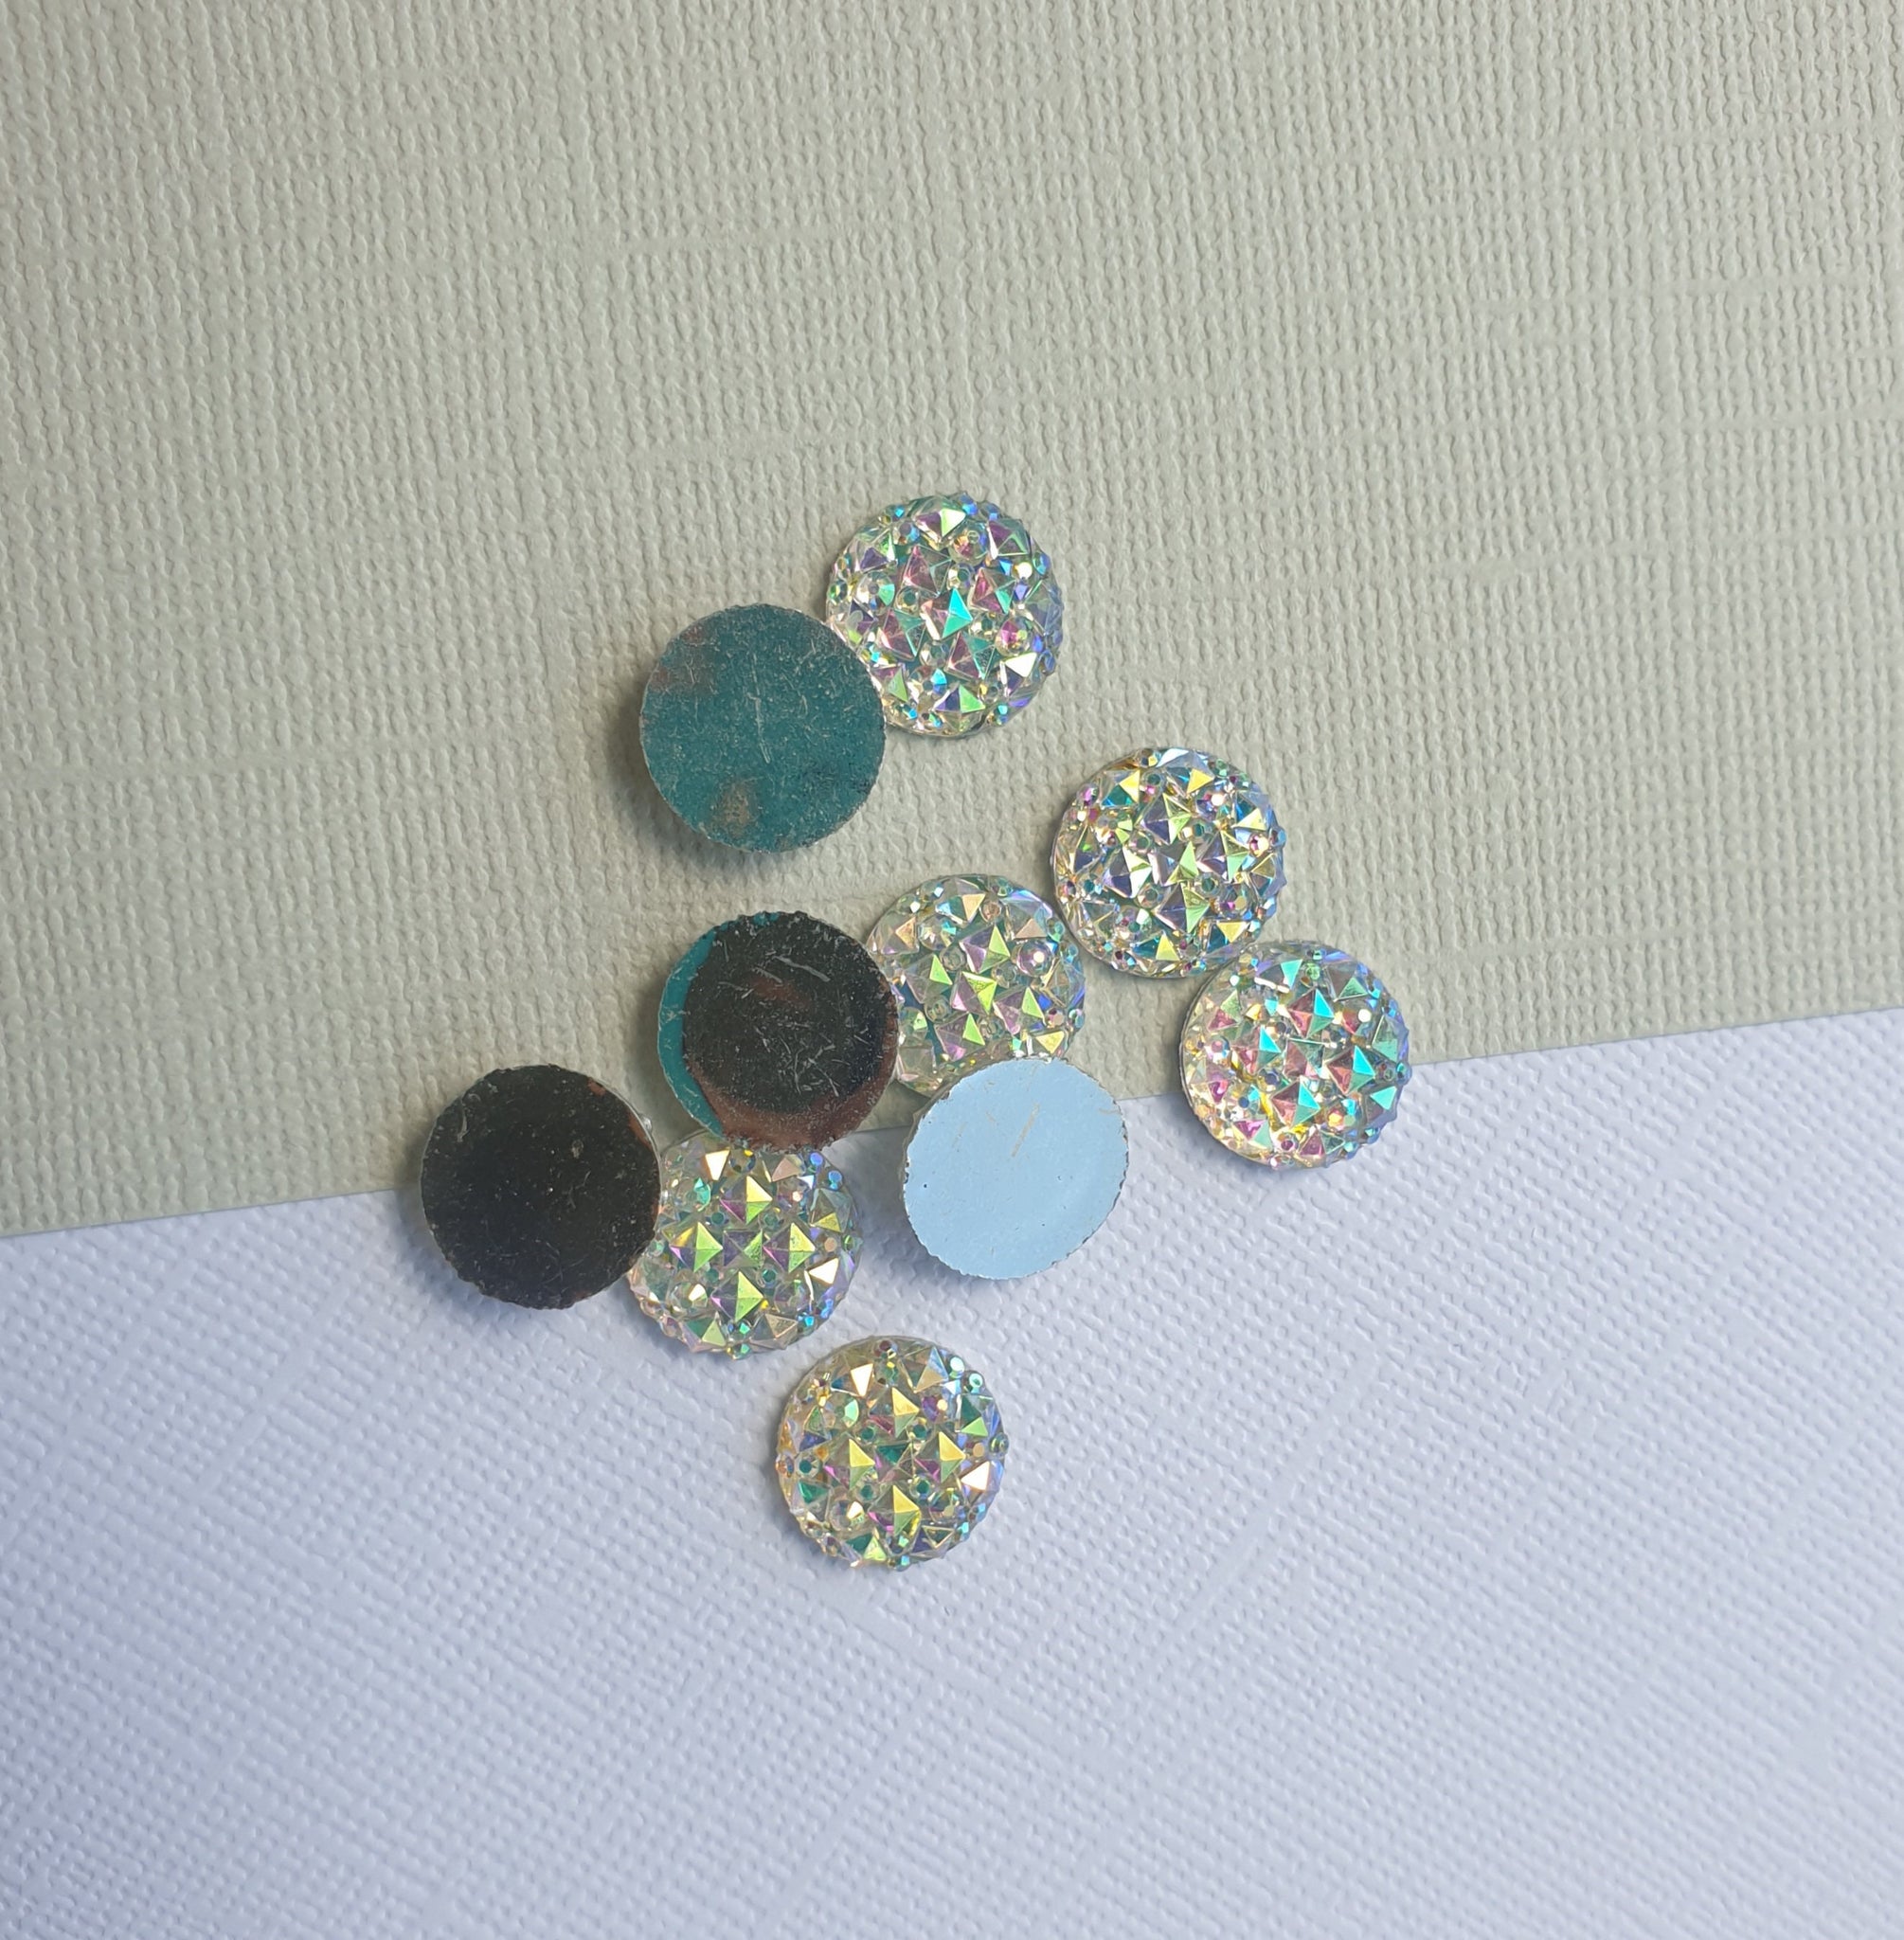 10pcs (5prs) 12mm White Apex texture, Color Flat Back, Resin Cabochons, sparkly on trend cabochons, for earrings, diy jewellery Australia